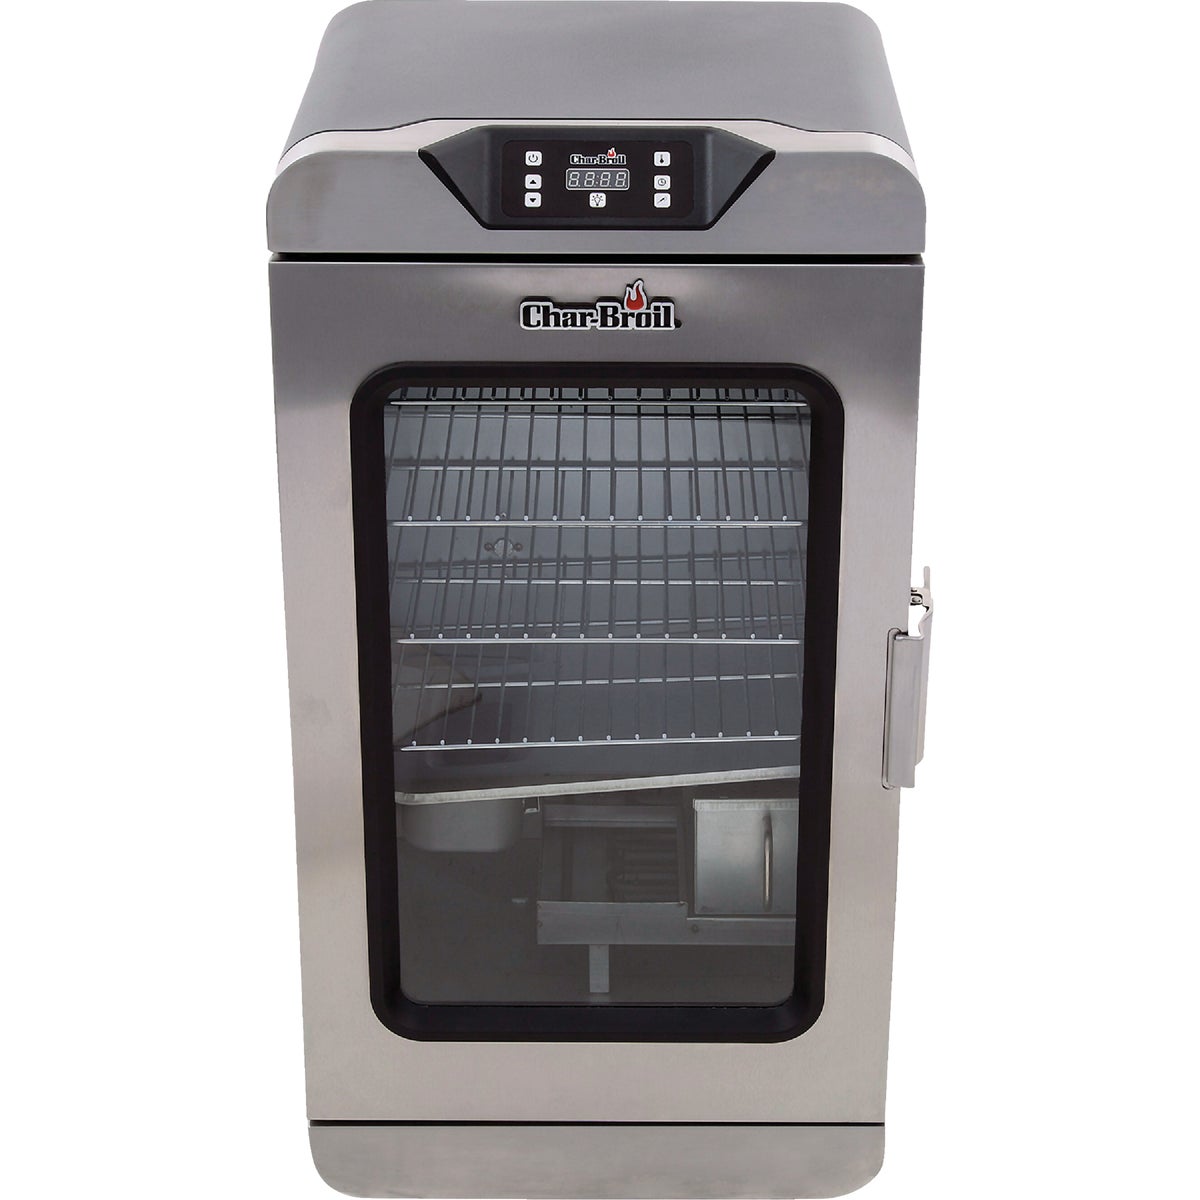 Item 801618, Char-Broil Deluxe Electric Smoker is perfect for the smoker enthusiast with